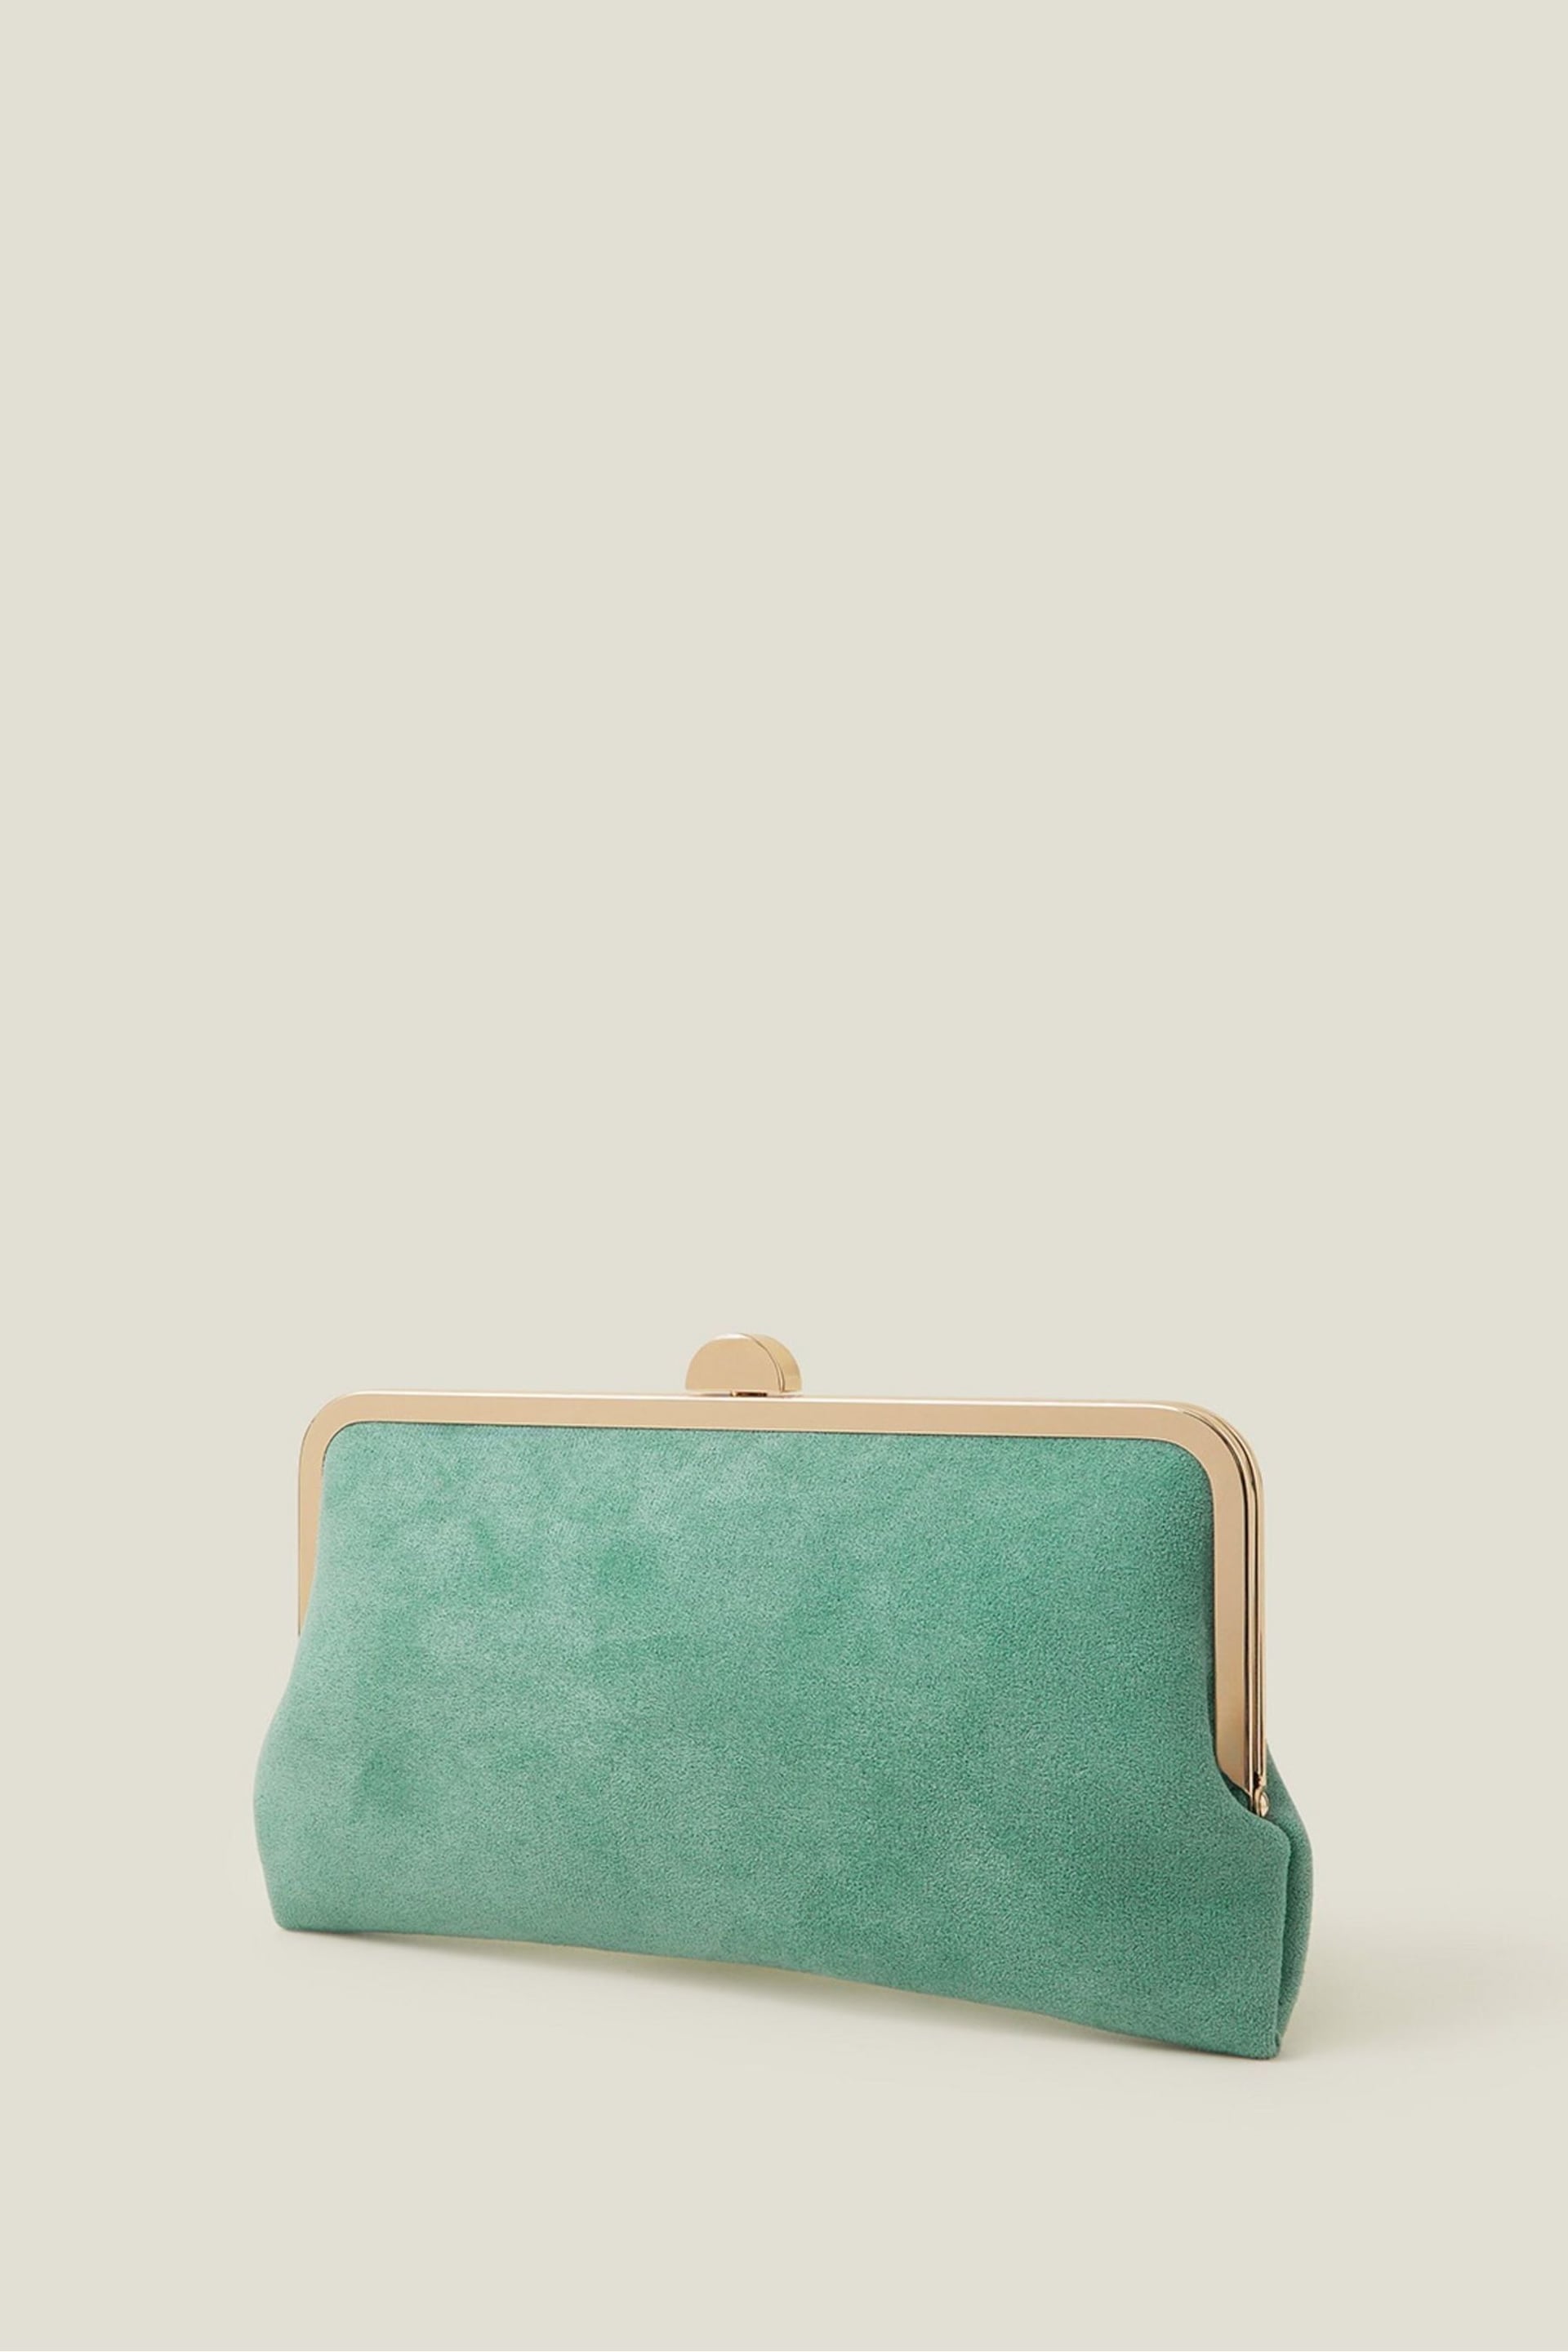 Accessorize Green Curved Suedette Clip Frame Clutch Bag - Image 2 of 3